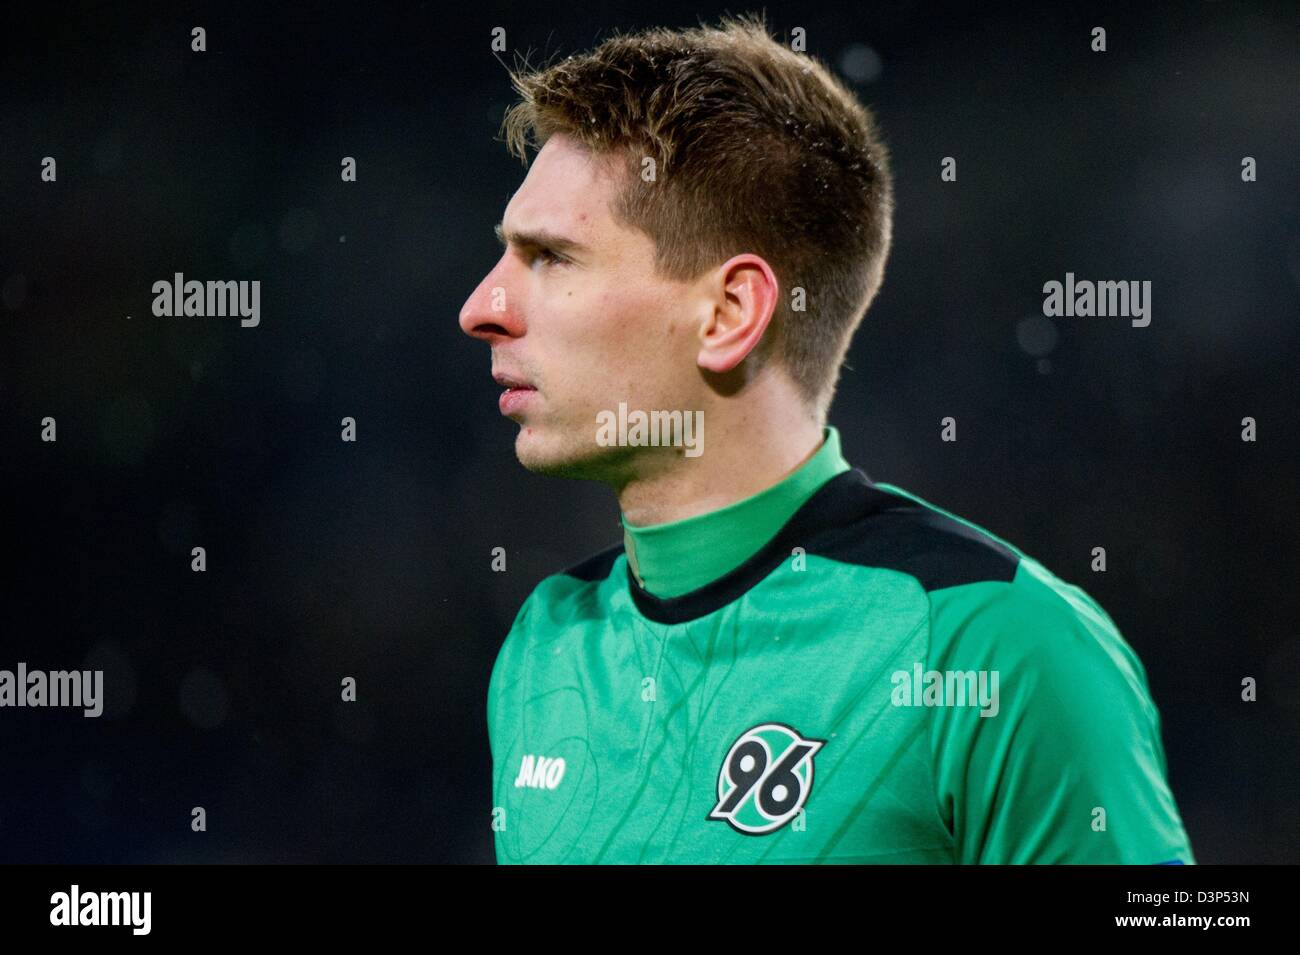 Hanover's goalkeeper Ron-Robert Zieler looks on during the UEFA Europa League round of 32 second leg soccer match between Hanover 96 and FC Anzhi Makhachkala at Hannover Arena in Hanover, Germany, 21 February 2013. Photo: Sebastian Kahnert/dpa Stock Photo